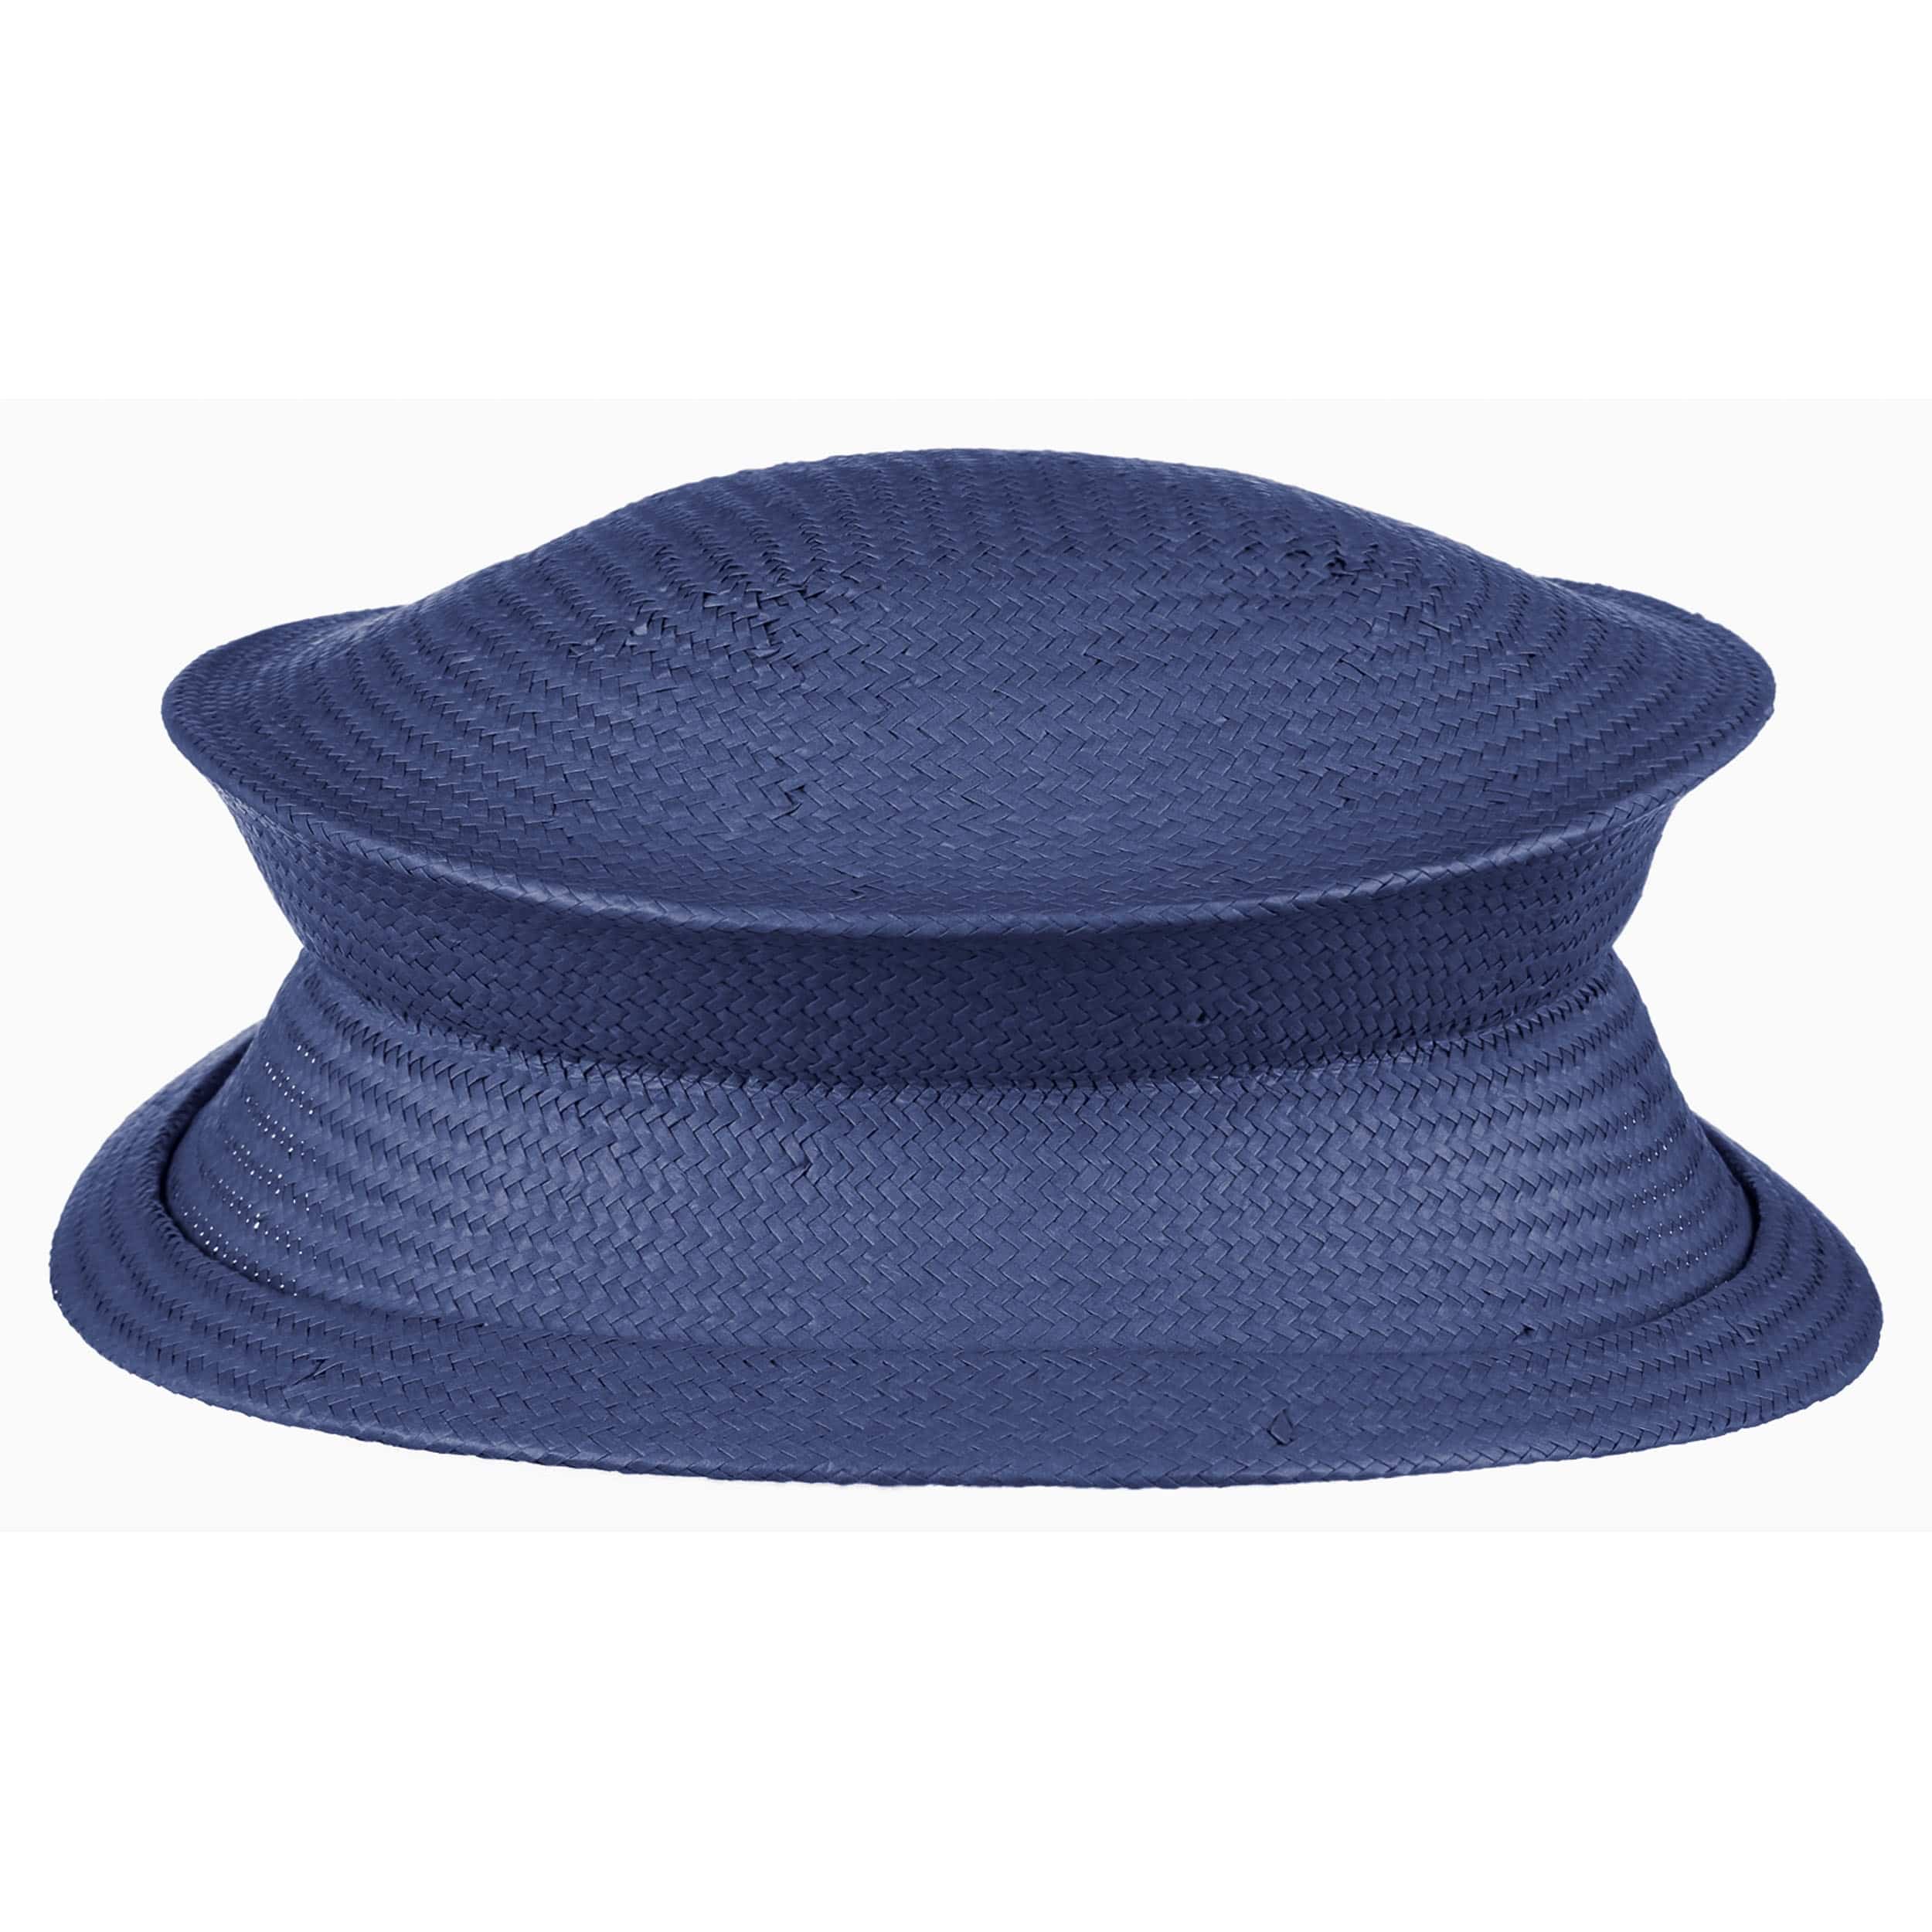 Latrobea Collapsible Hat by Seeberger - 53,95